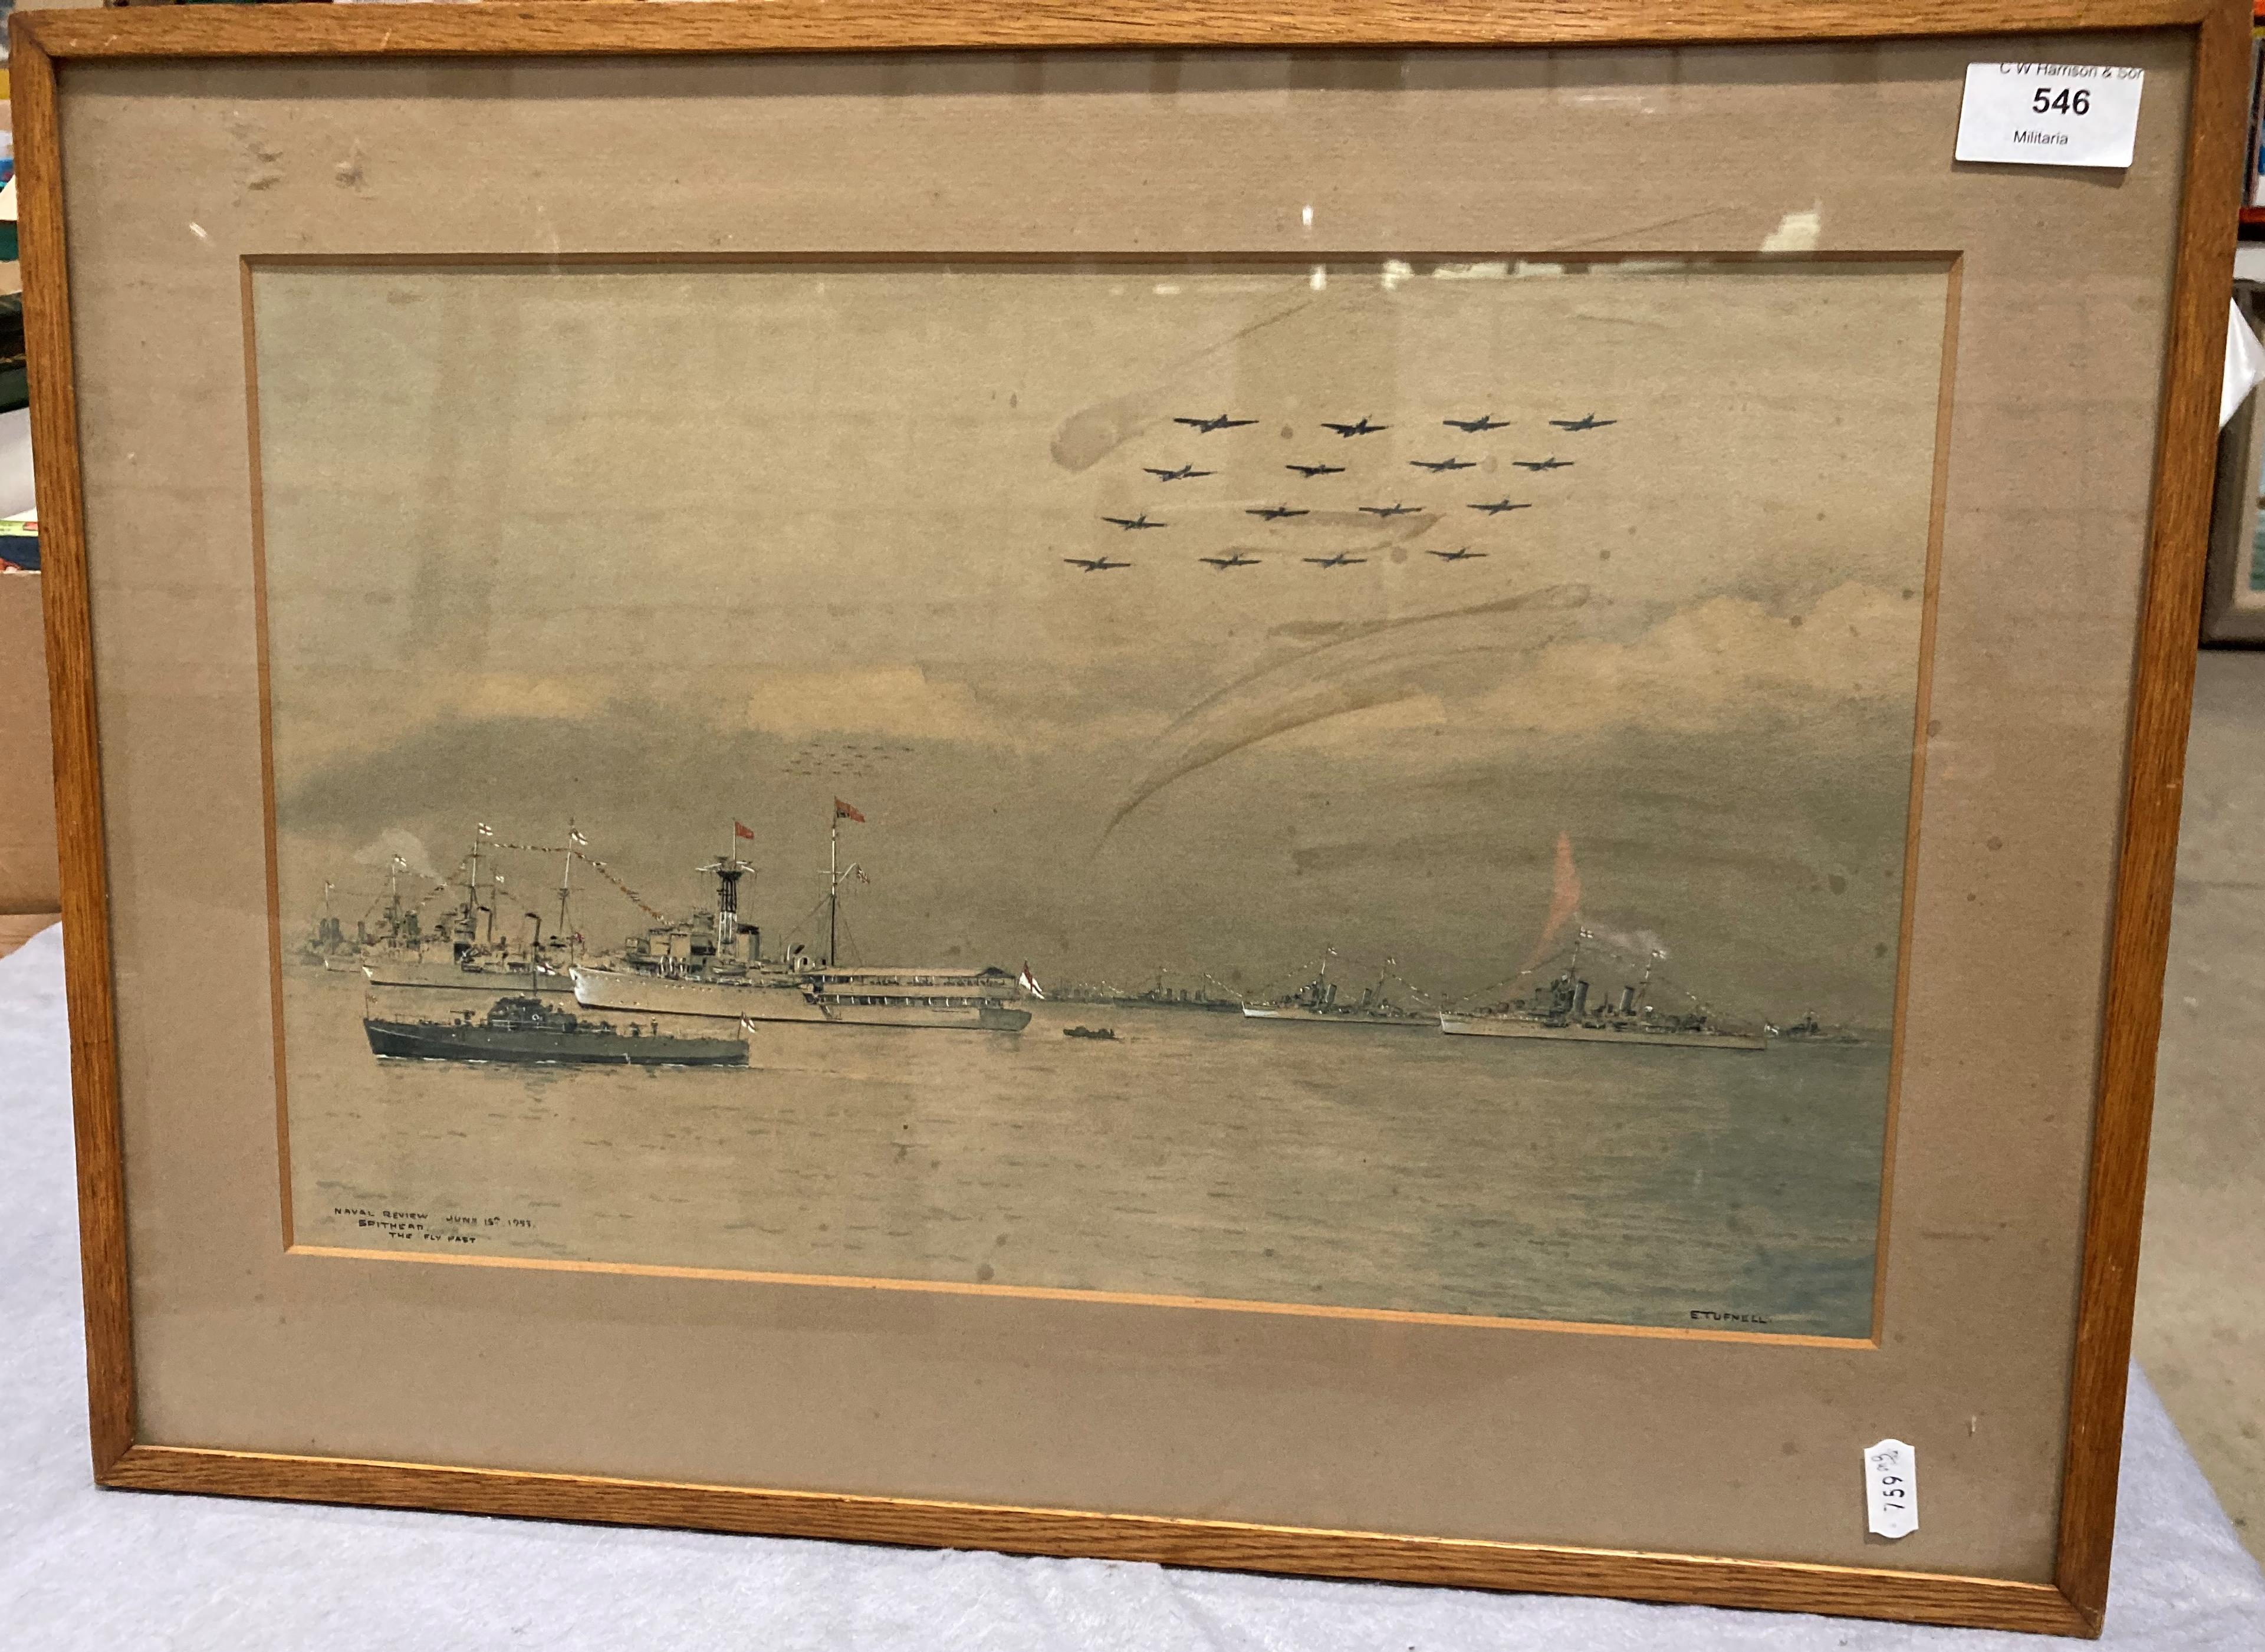 E Tufnell framed watercolour 'Naval Review June 15th 1953 Spithead - The Fly Past' 27 x 42cm (some